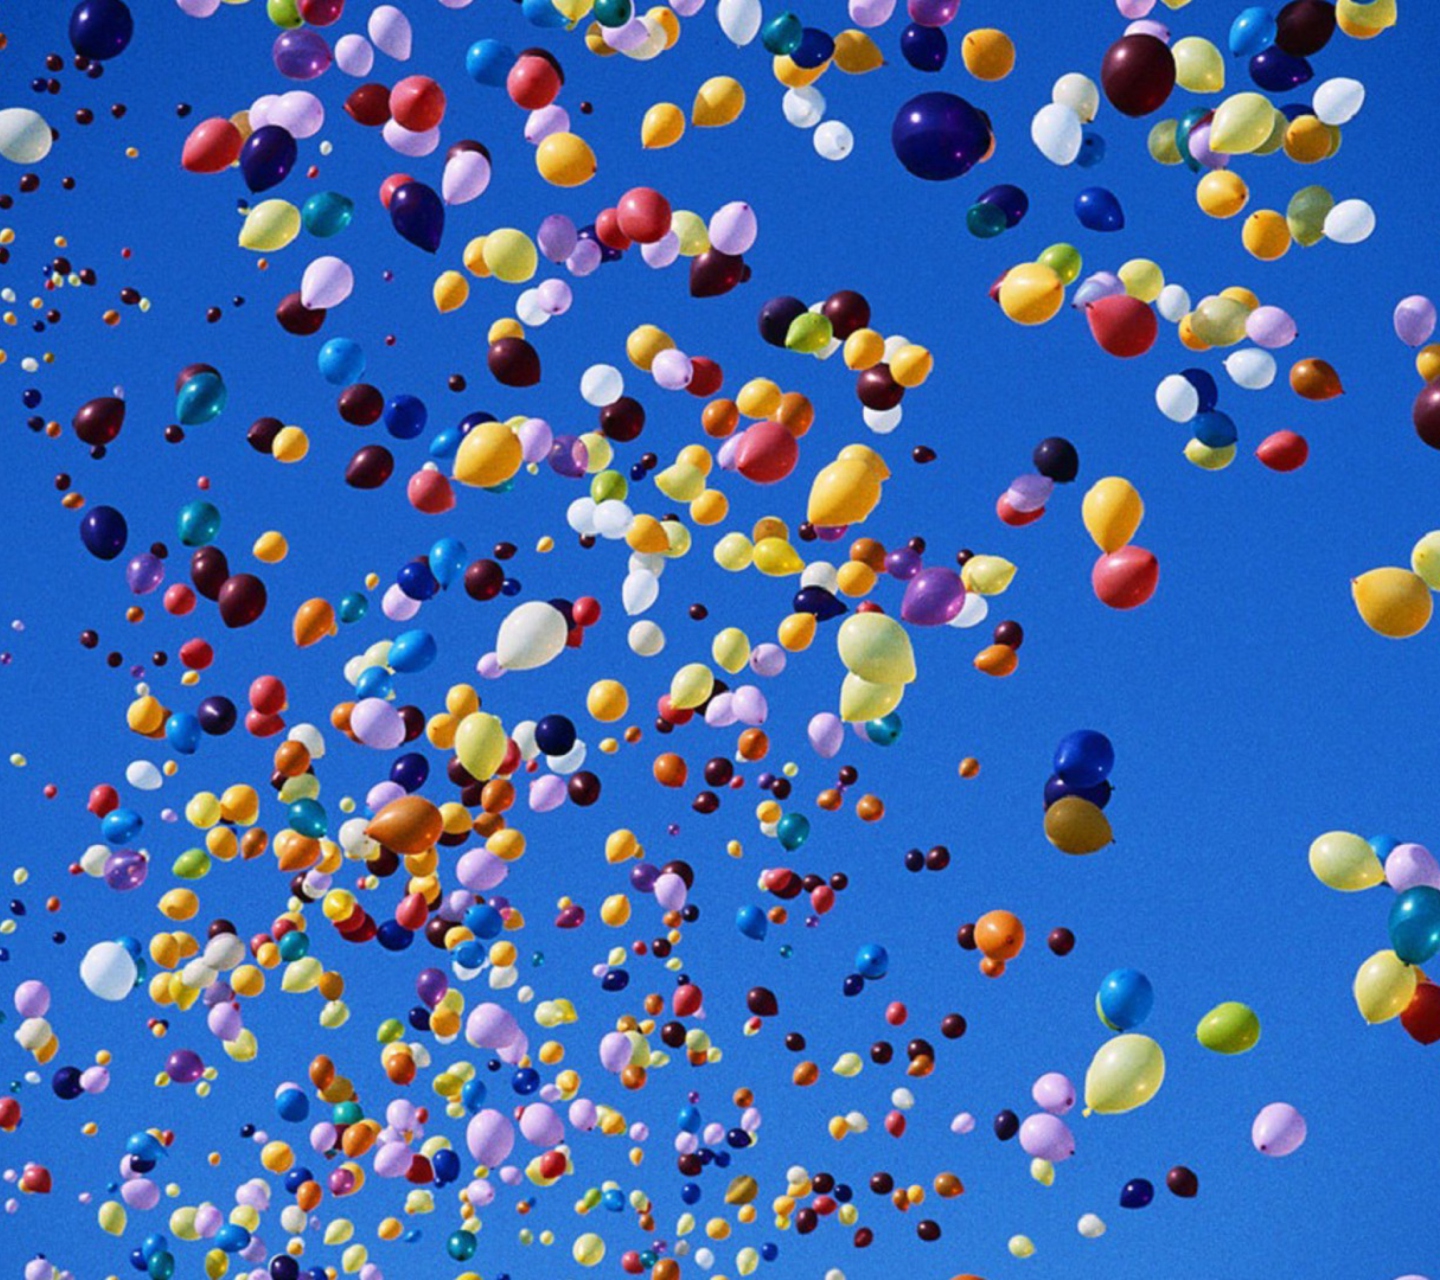 Colorful Balloons In Blue Sky screenshot #1 1440x1280